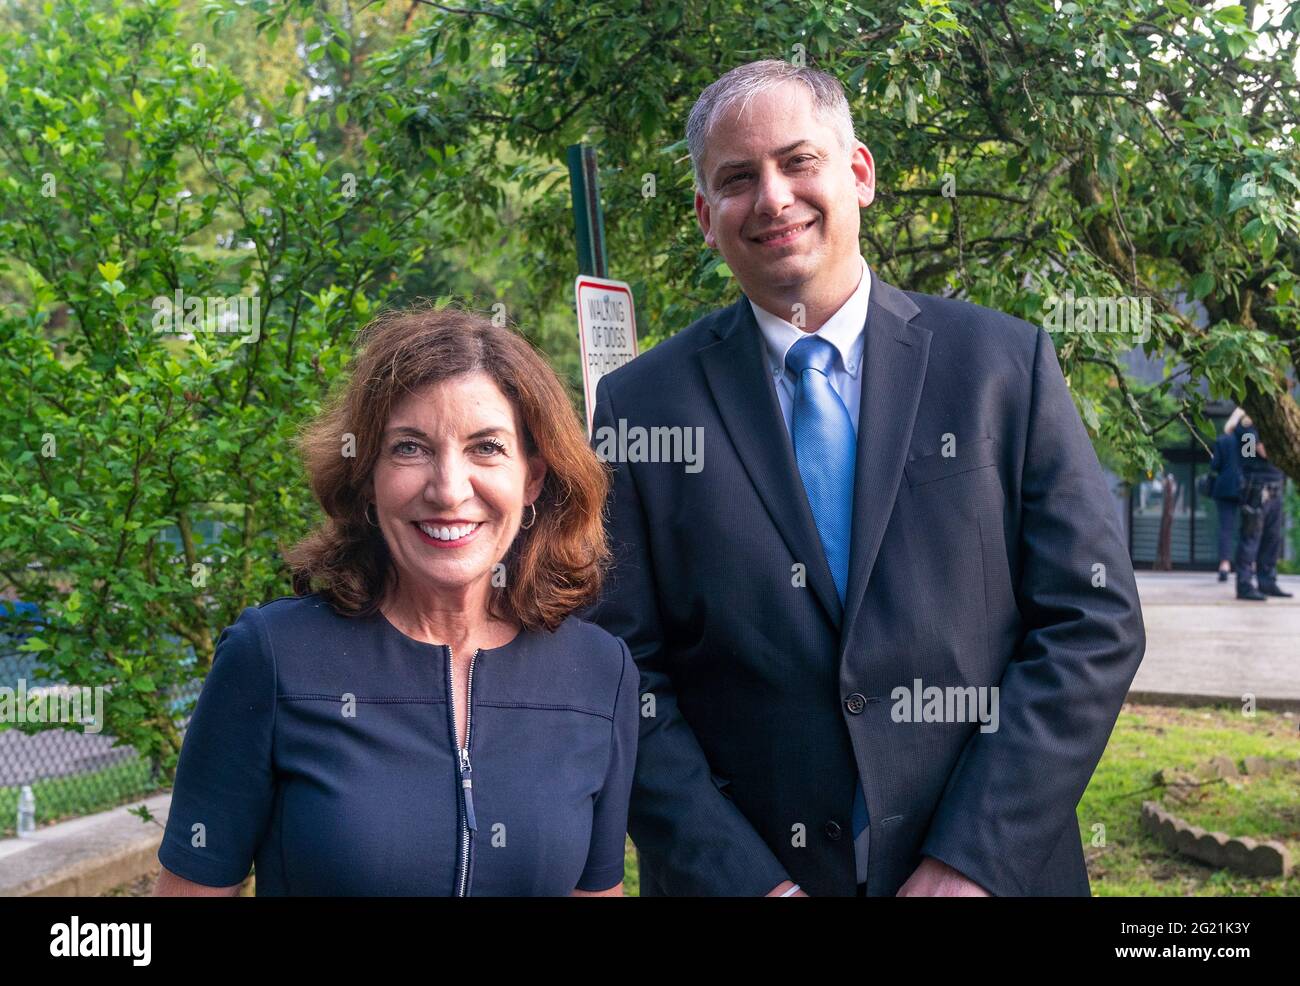 Scarsdale, NY - June 7, 2021: Lieutenant Governor Kathy Hochul and Acting New York Israeli Consul General Israel Nitzan attend Westchester stands united against anti-semitism and hate rally at Jewish Community Center of Mid-Westchester Stock Photo